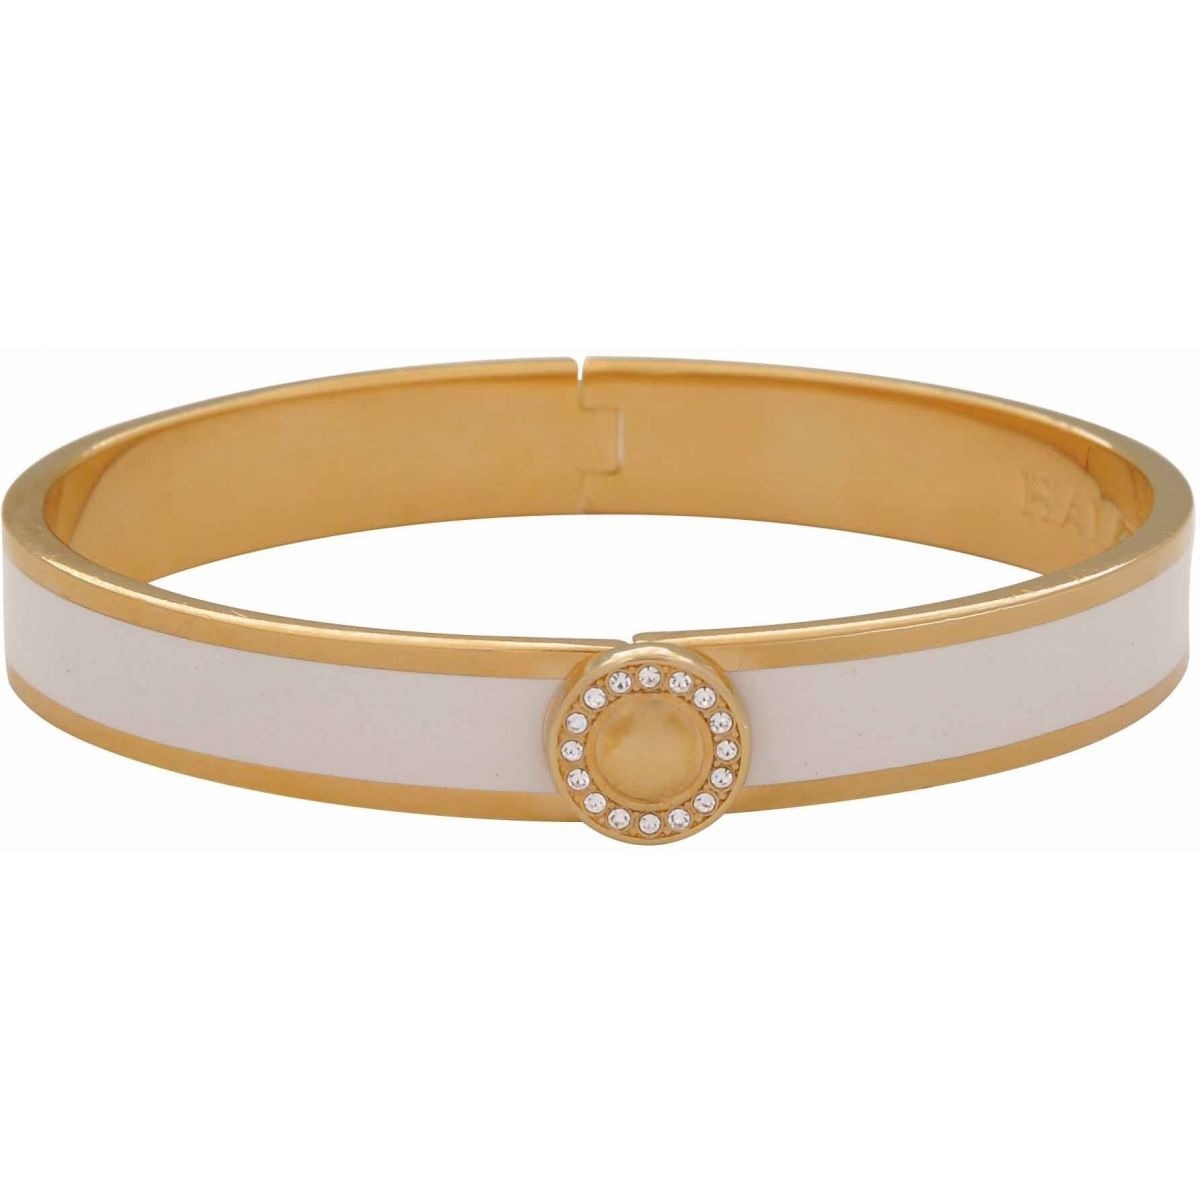 Halcyon Days Bangles in Gold for Women from Watch Shop GOOFASH